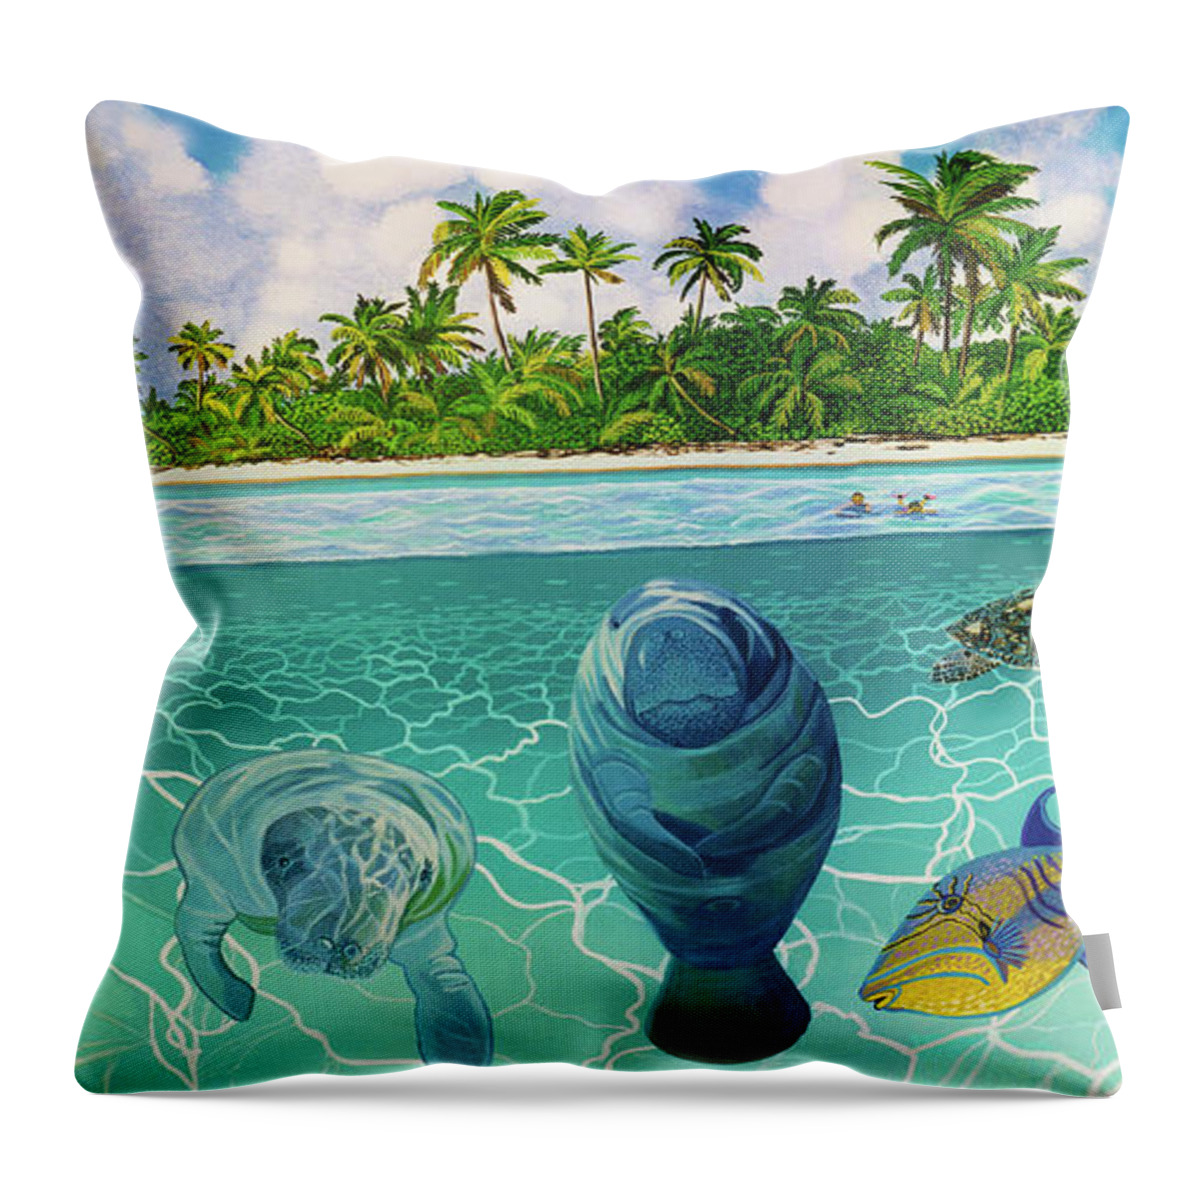 South Pacific Islands Throw Pillow featuring the painting South Pacific Paradise with Sea Turtles Towel Version by Bonnie Siracusa